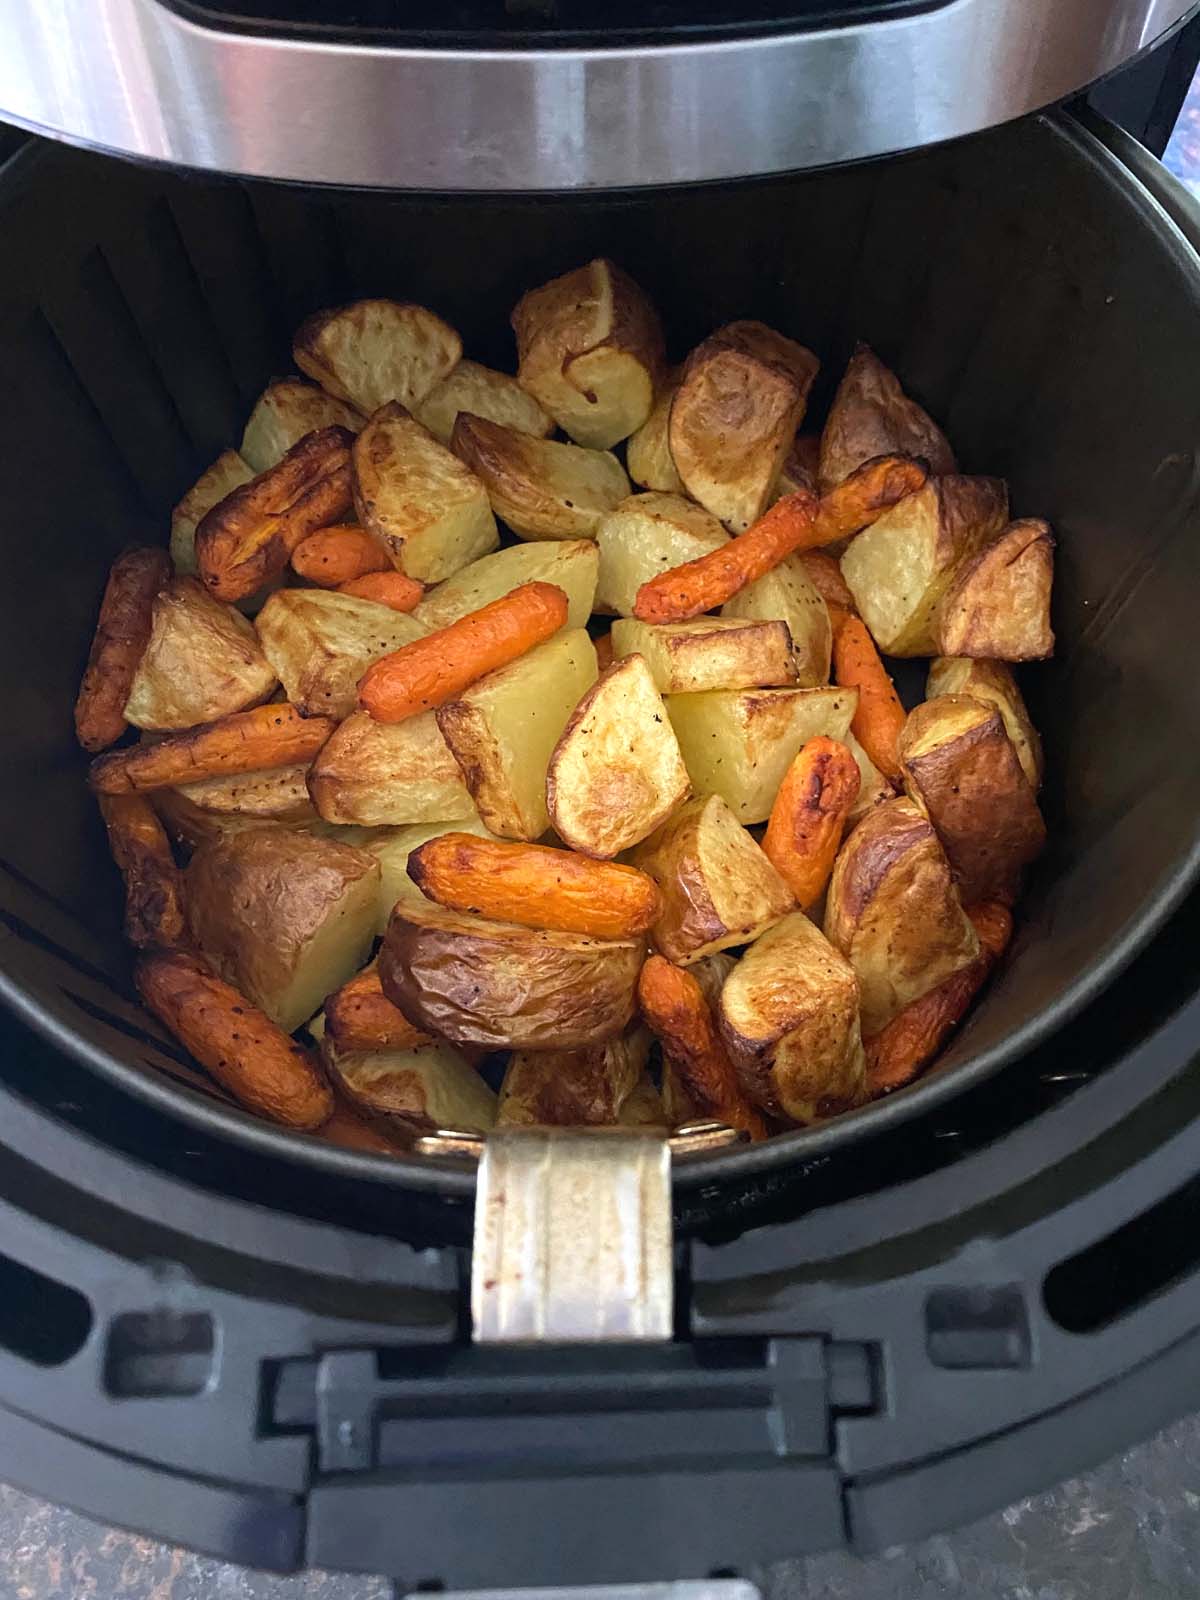 Roasted potatoes and carrots in an air fryer.